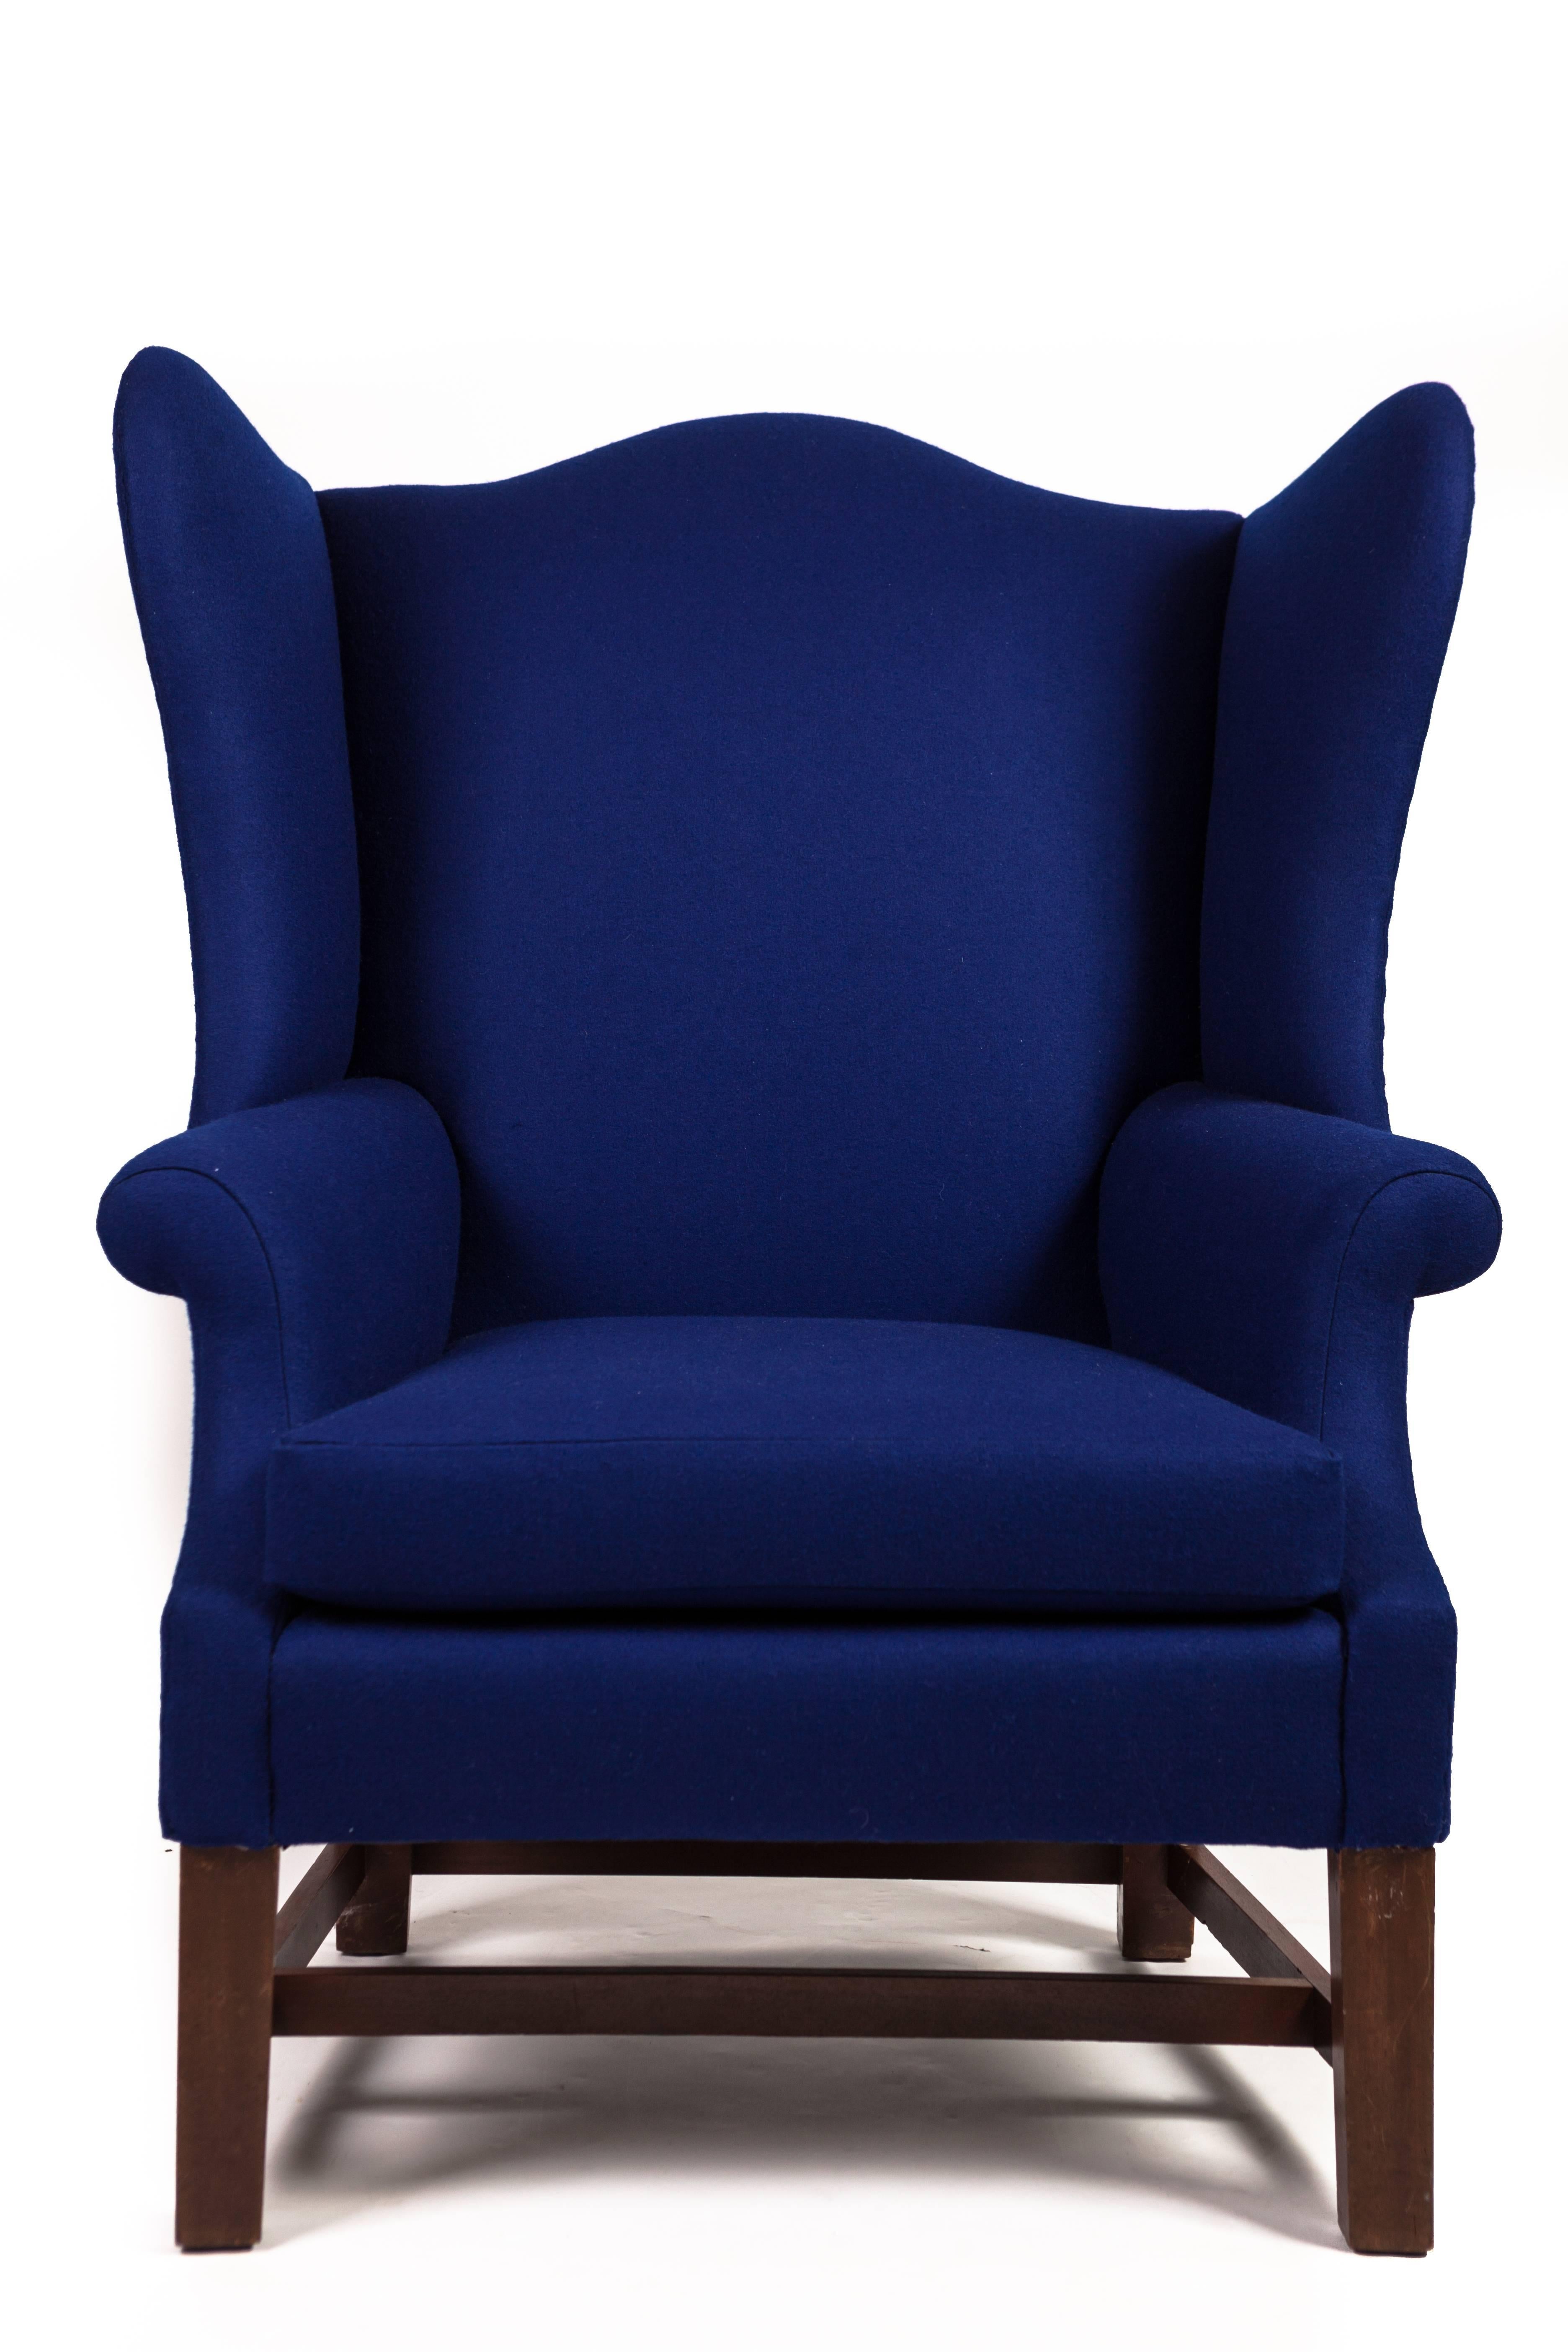 George III style wingback armchair. Newly upholstered in blue felt.